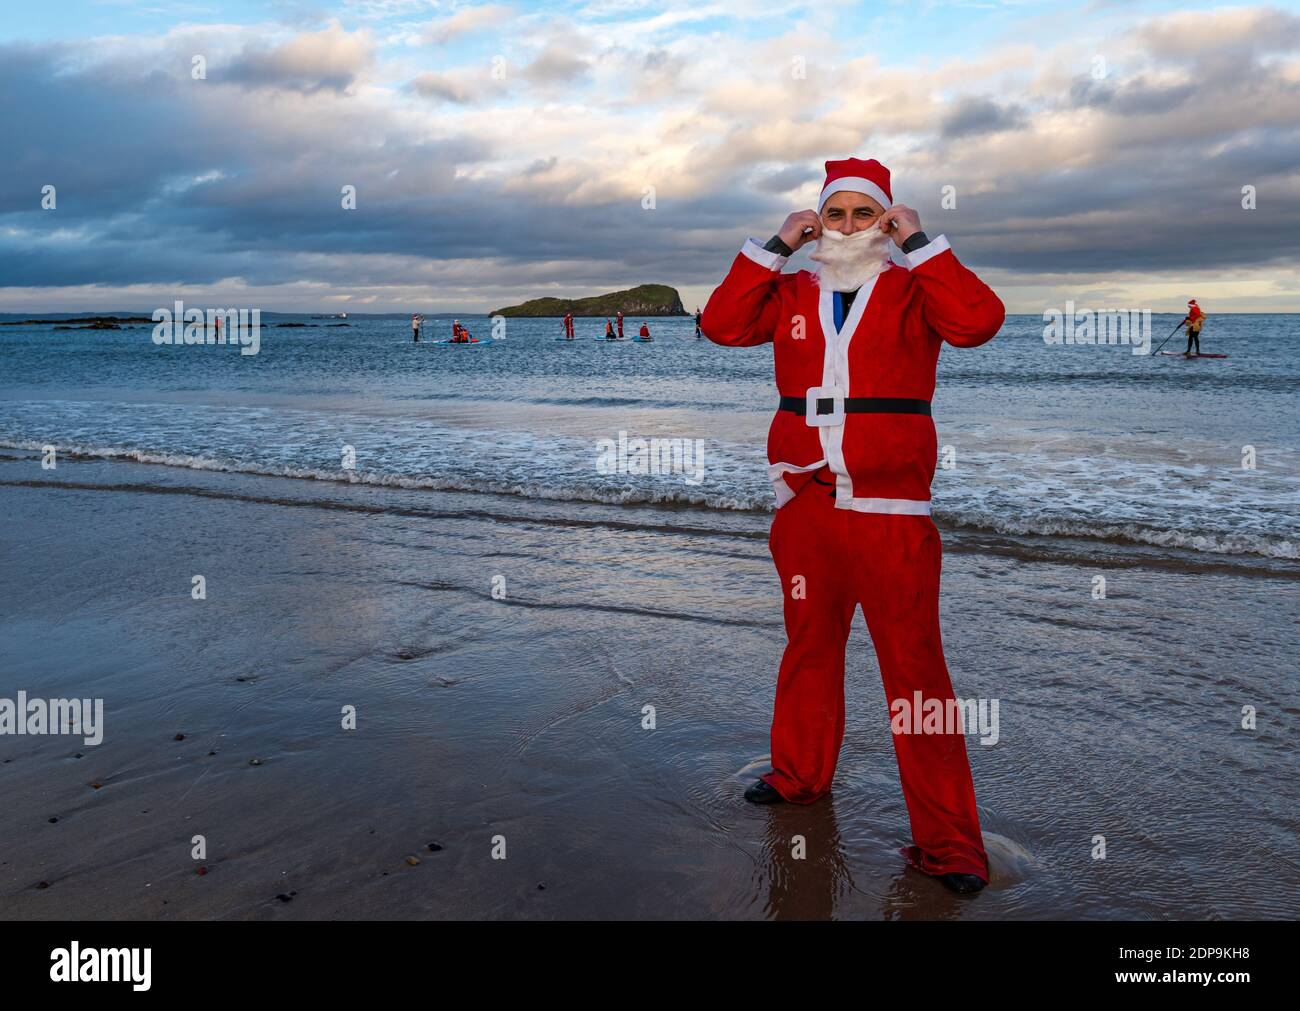 North Berwick, East Lothian, Scotland, United Kingdom, 19th December 2020. Paddle Boarding Santas for charity: a local community initiative by North Berwick News and Views called 'Christmas Cheer' raises over £5,000 funds for families in need. Pictured: Organiser, Dave McGregor dressed in a Santa costume Stock Photo